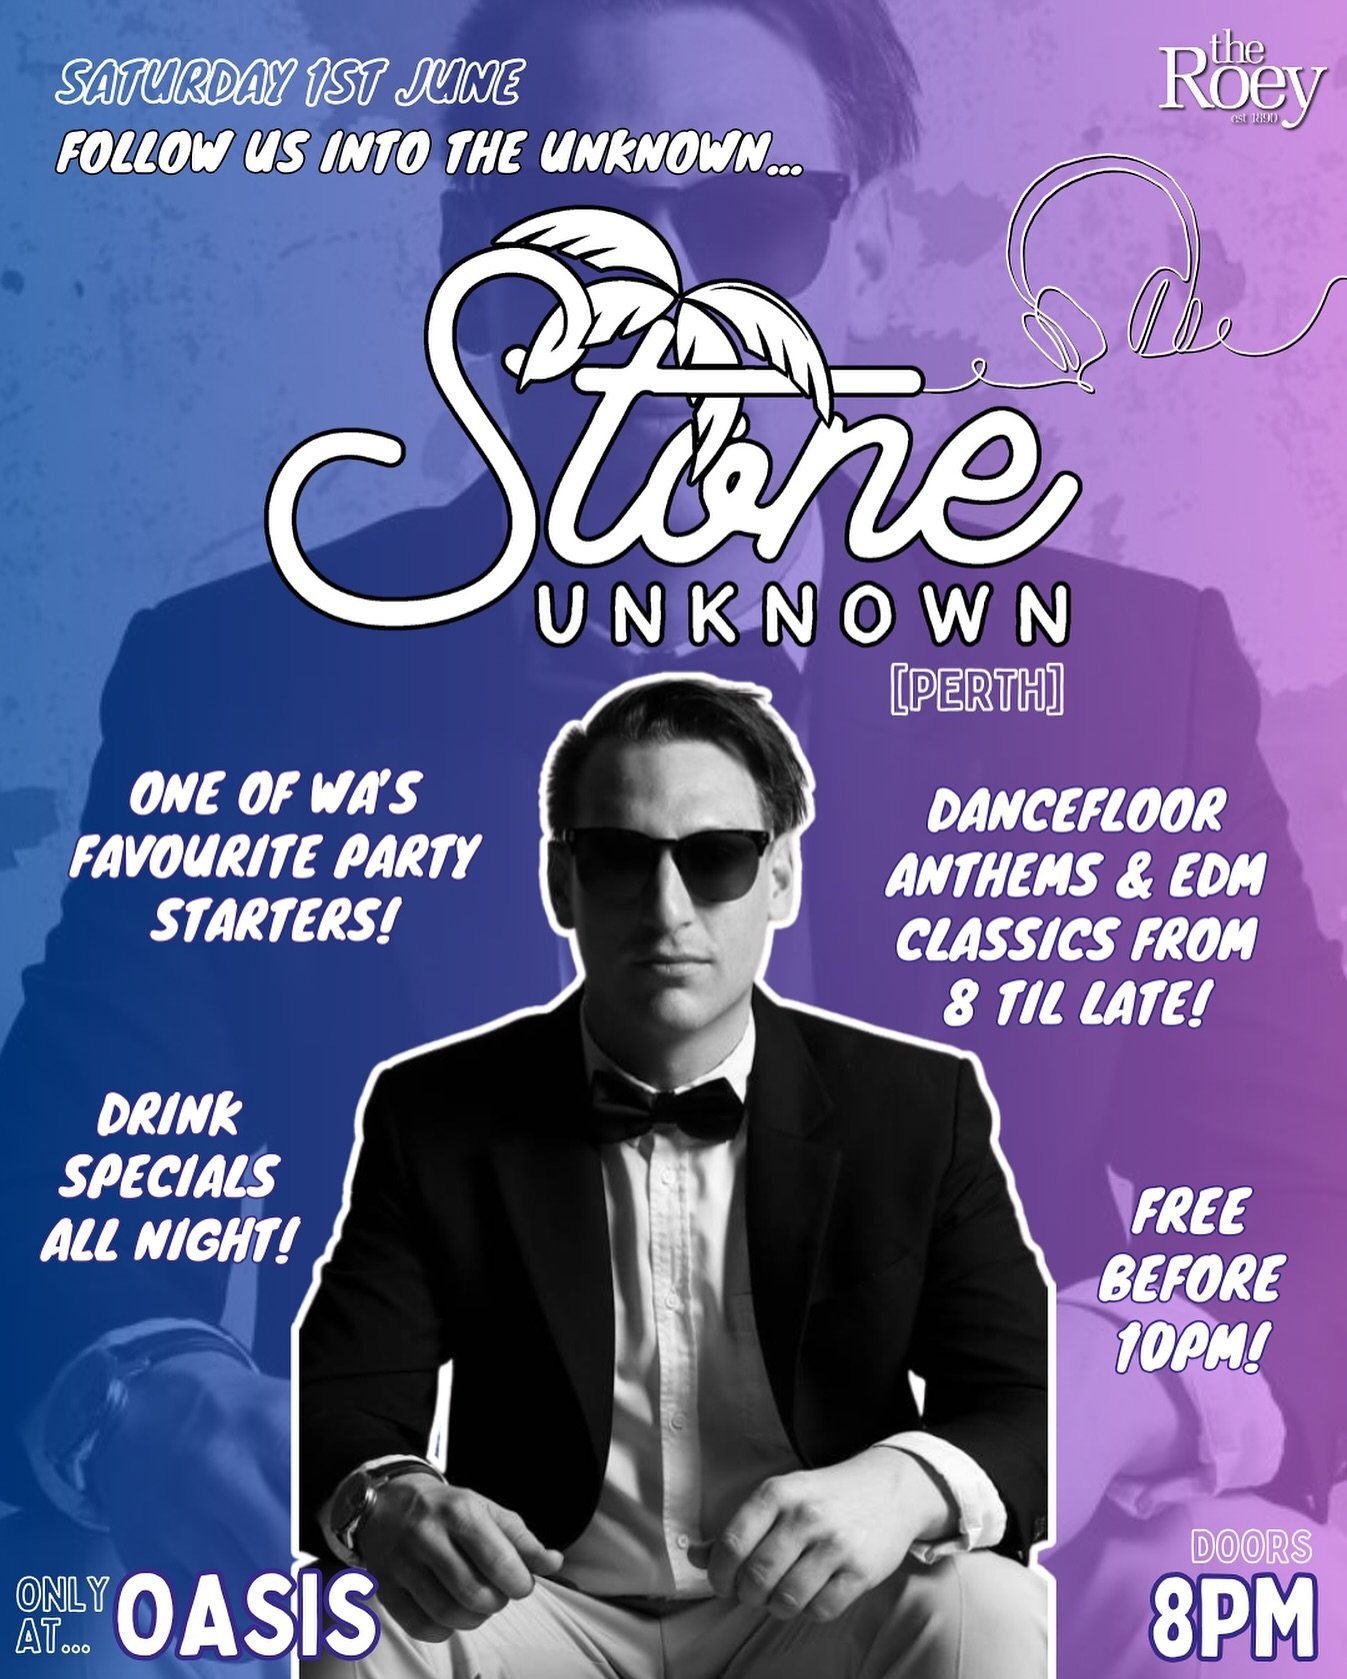 INTO THE UNKNOWN Dance Party happening TONIGHT in Oasis! 

Don&rsquo;t miss @stoneunknown in his first Saturday set for the season, mixing up your fave EDM classics &amp; party anthems from 8 til late

FREE ENTRY until 10pm &amp; drink specials allll